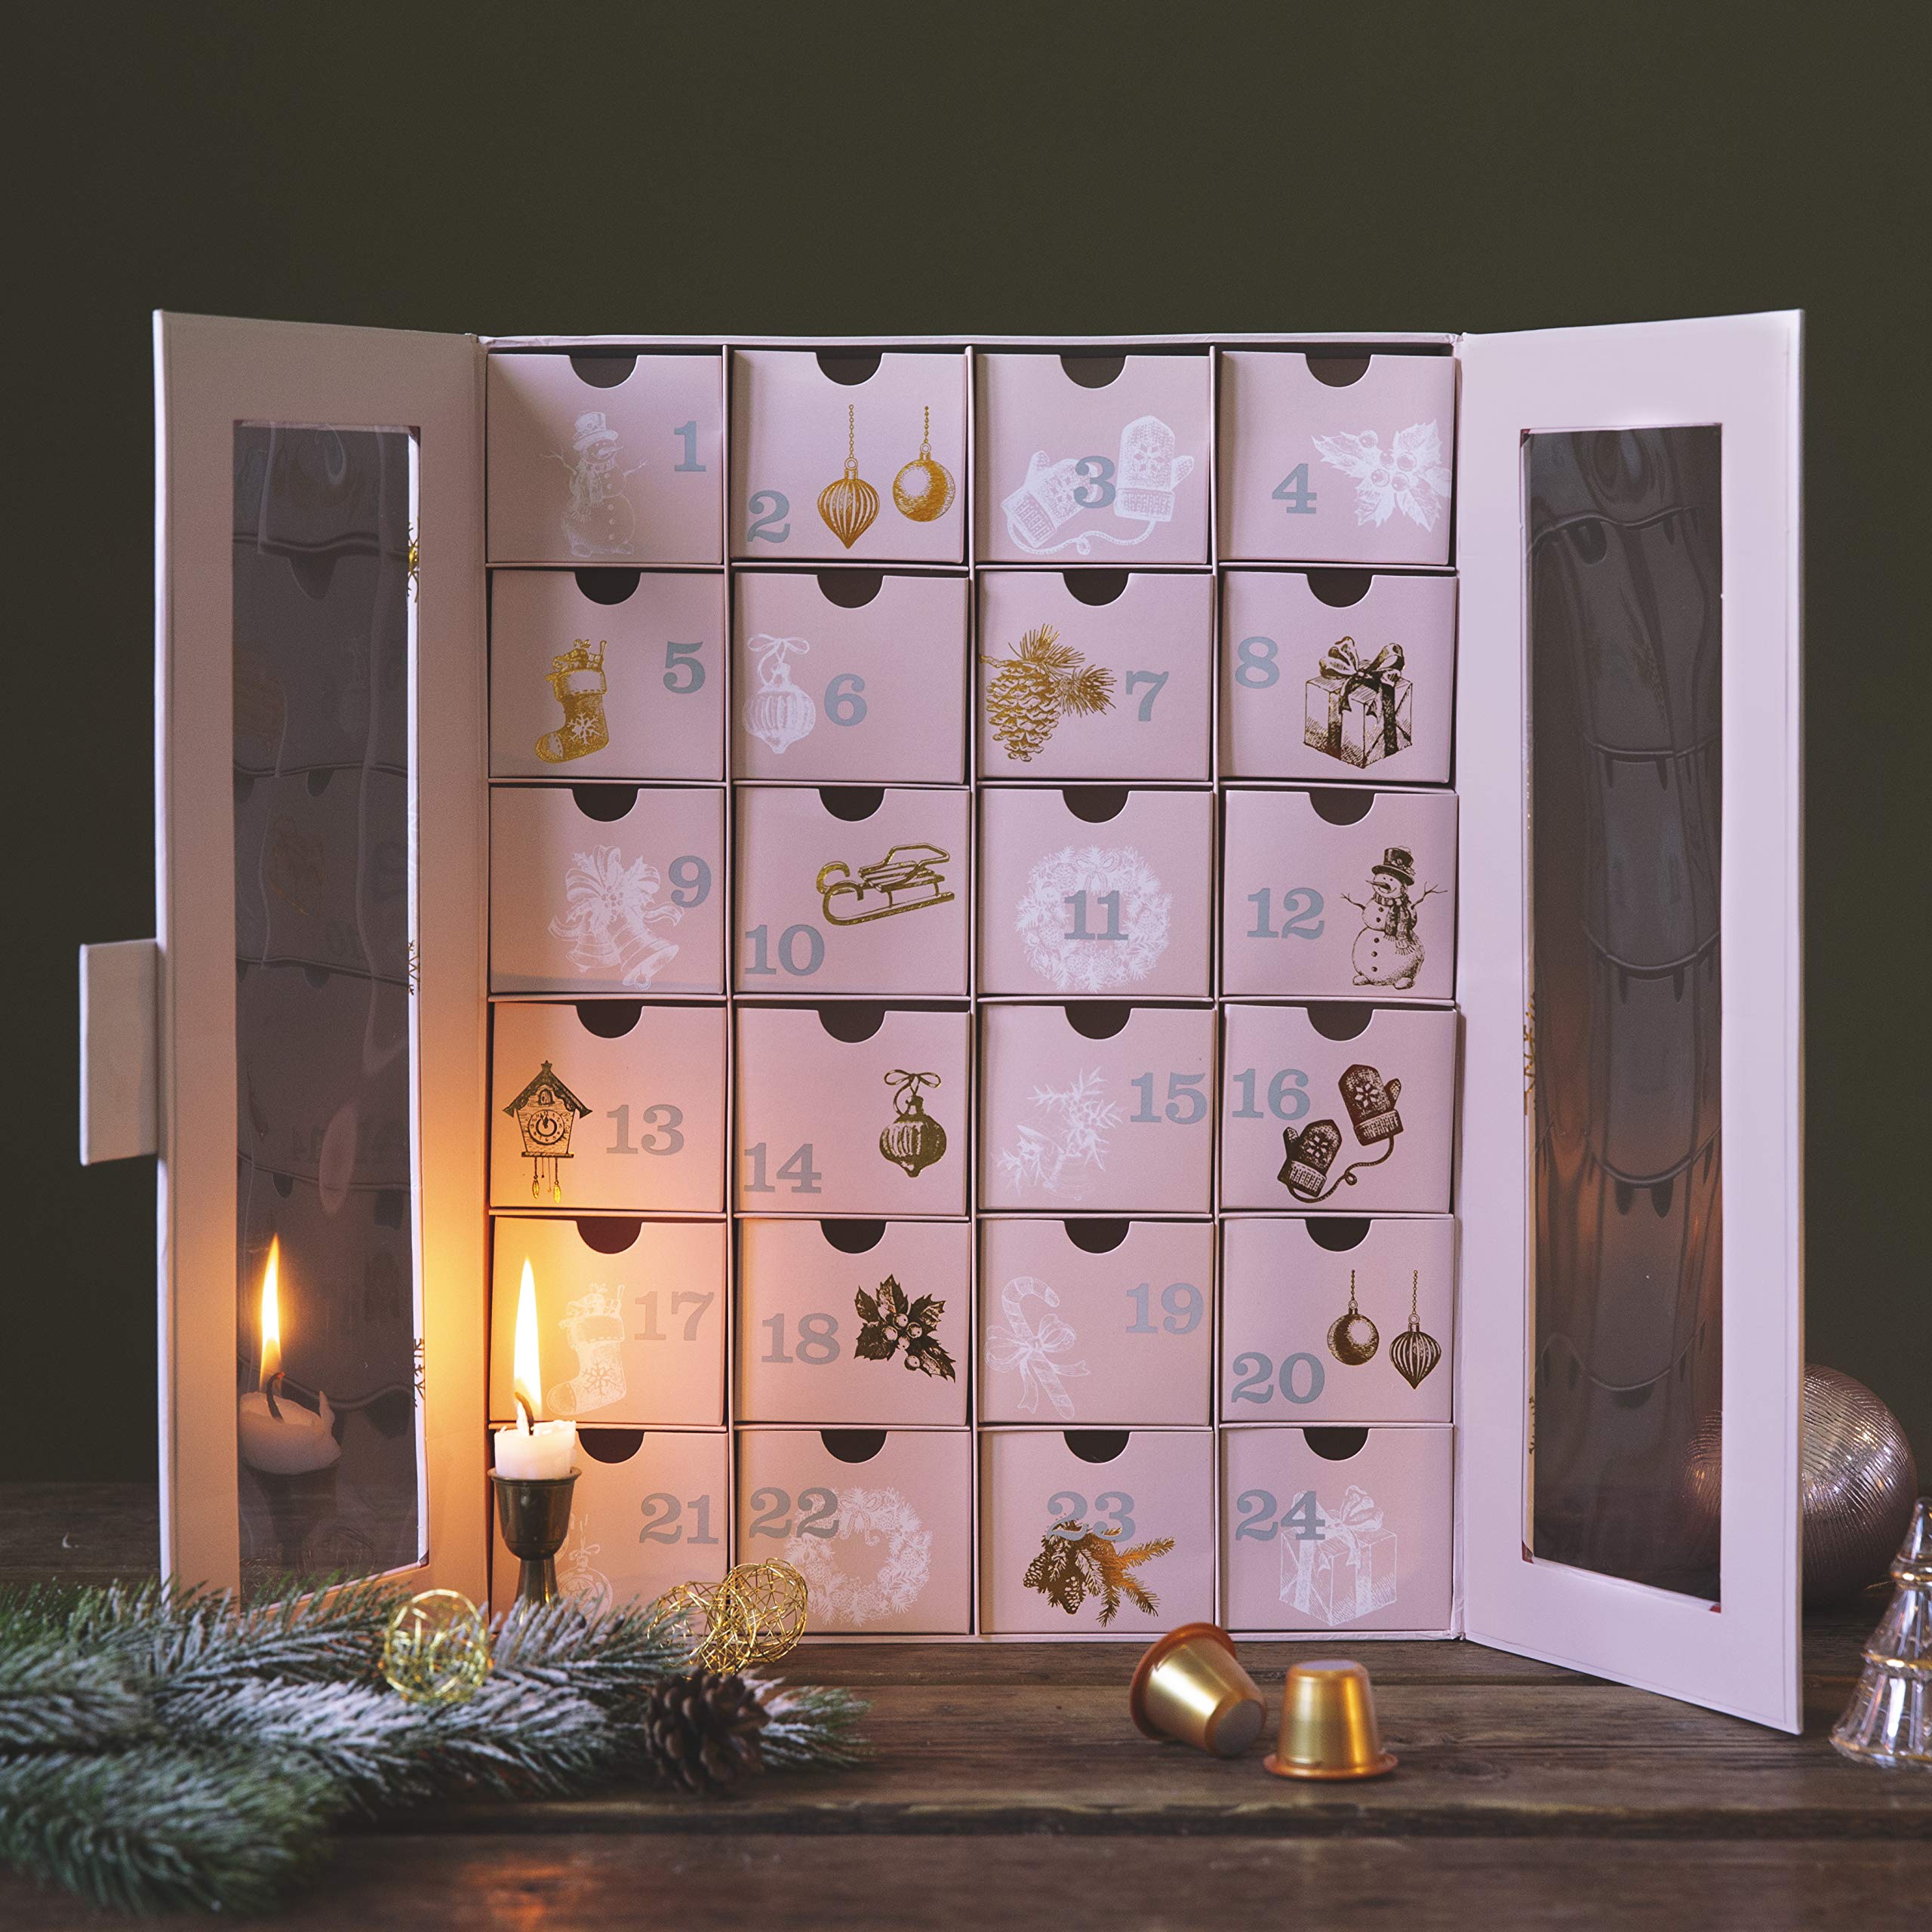 7 Best Coffee Advent Calendars of 2022 to Brew Some Holiday Cheer